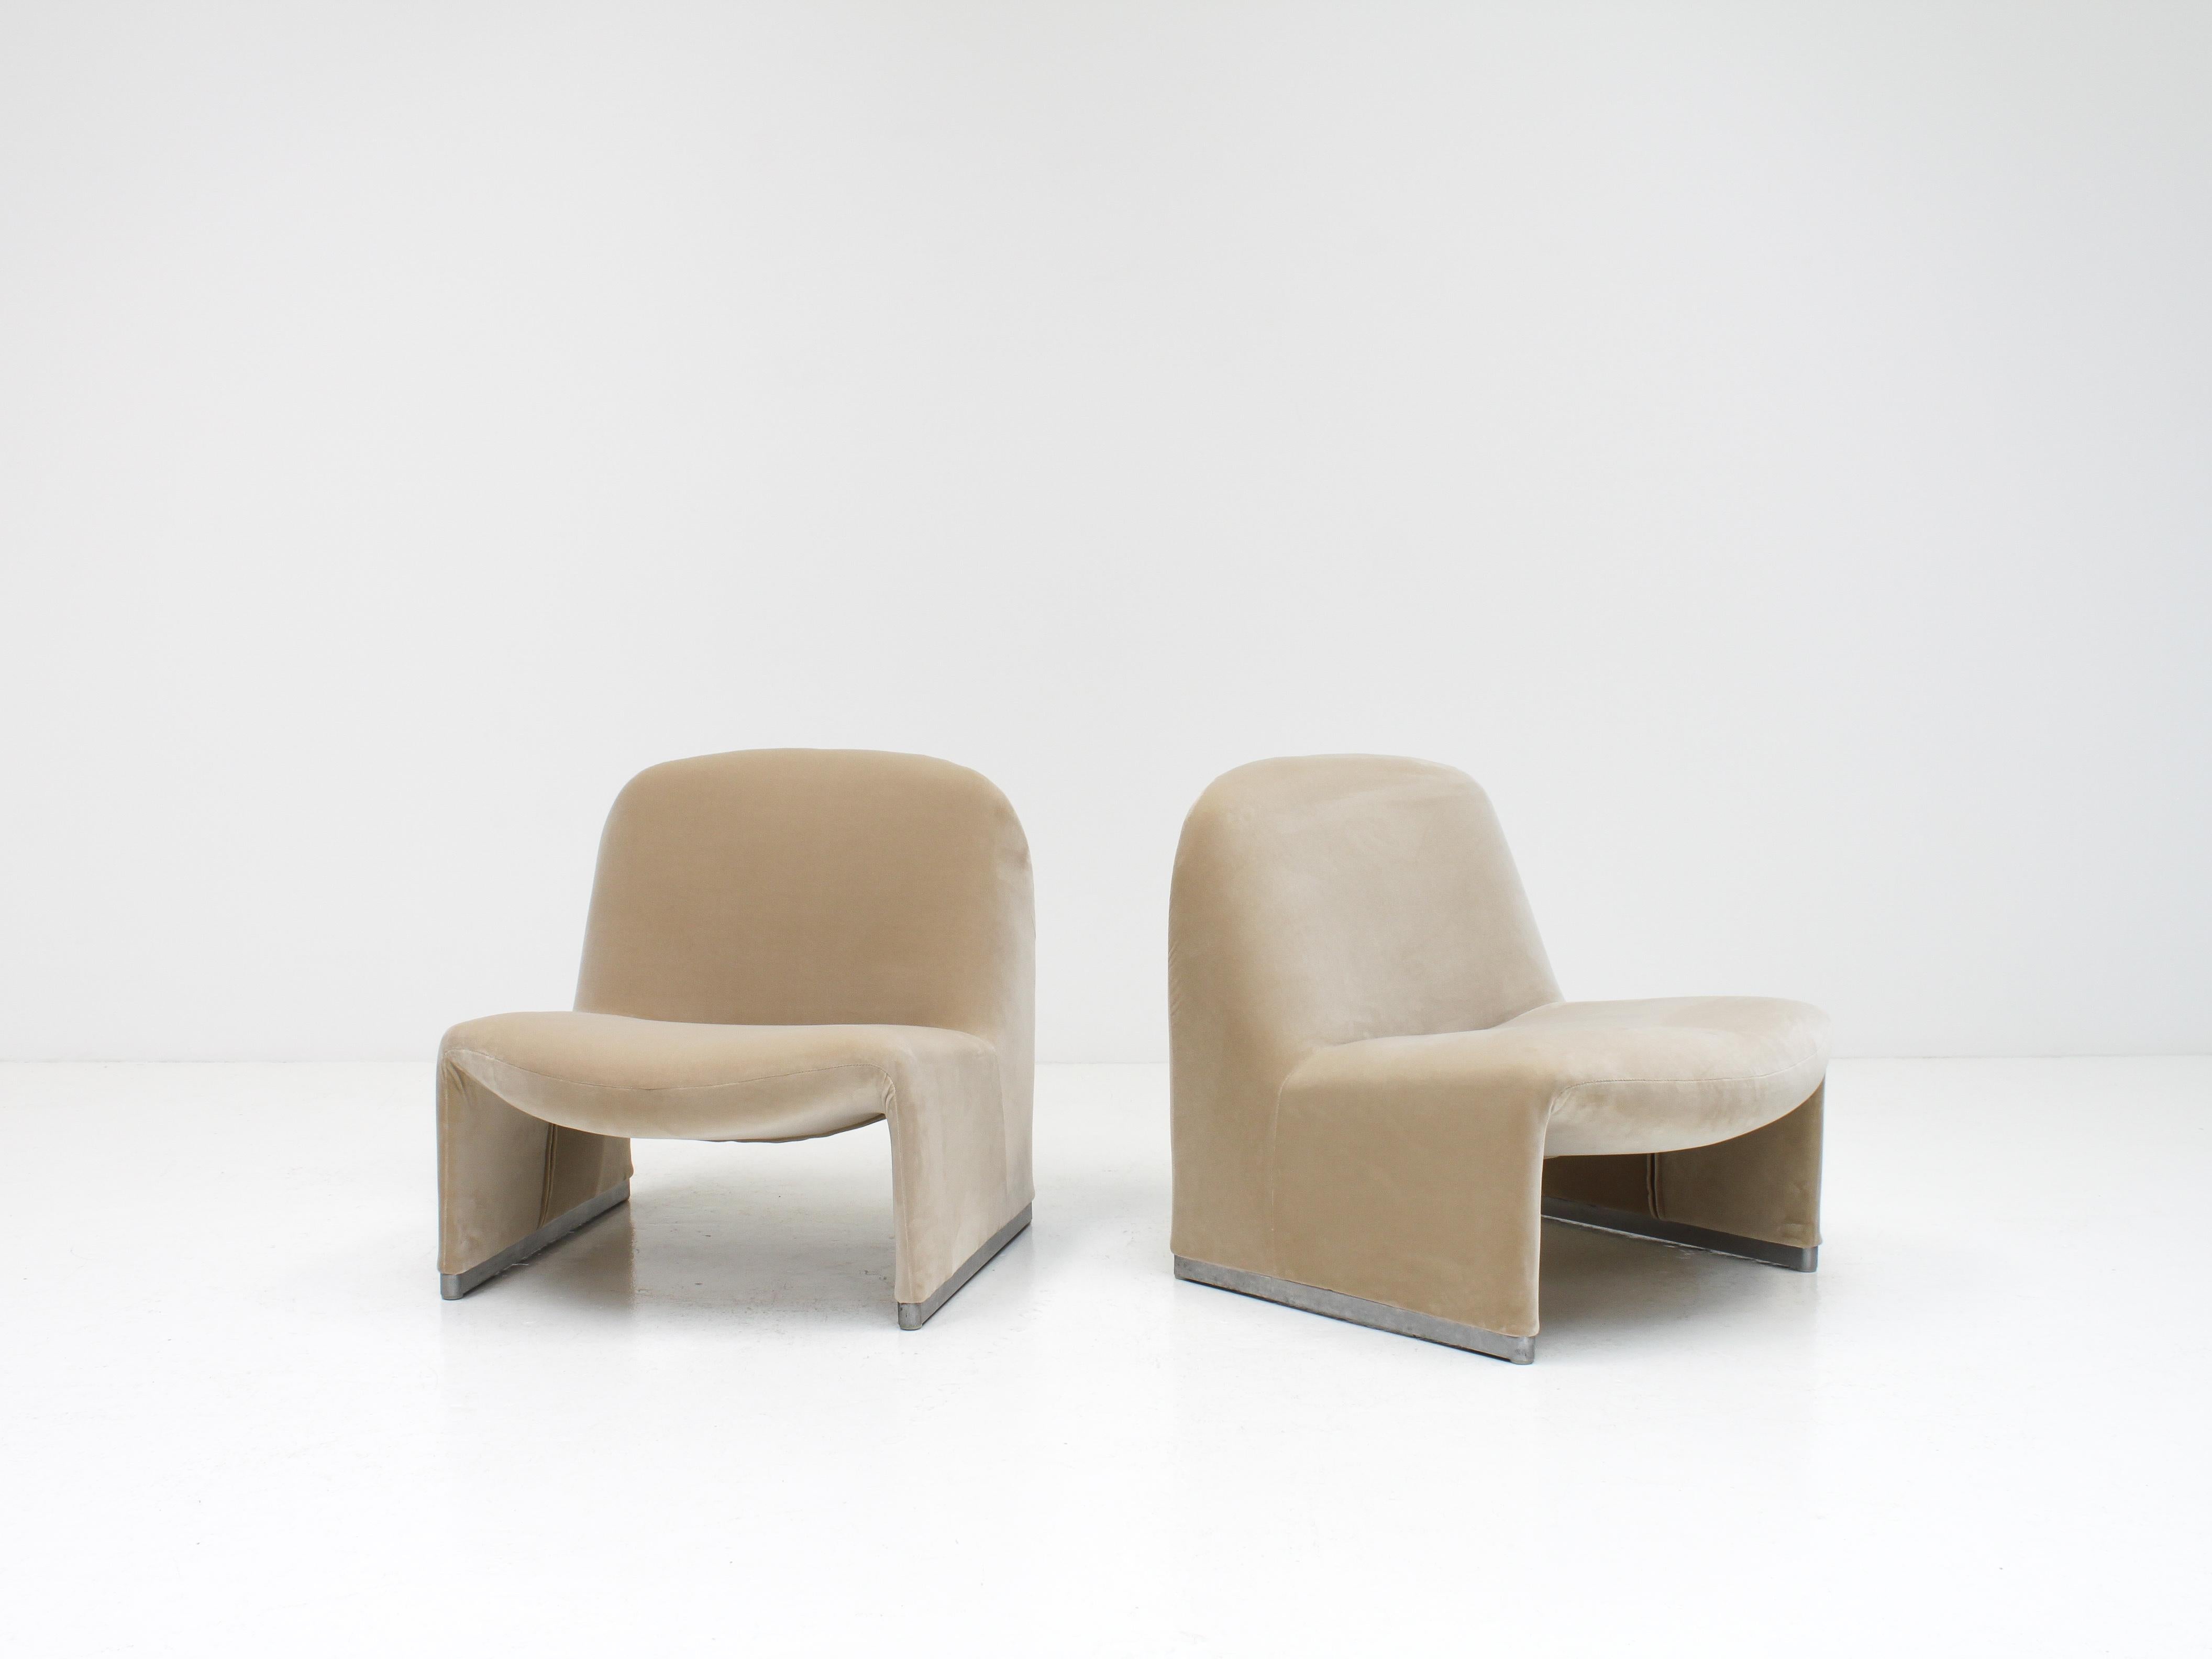 Giancarlo Piretti “Alky” Chairs in New Velvet, Artifort, 1970s For Sale 1